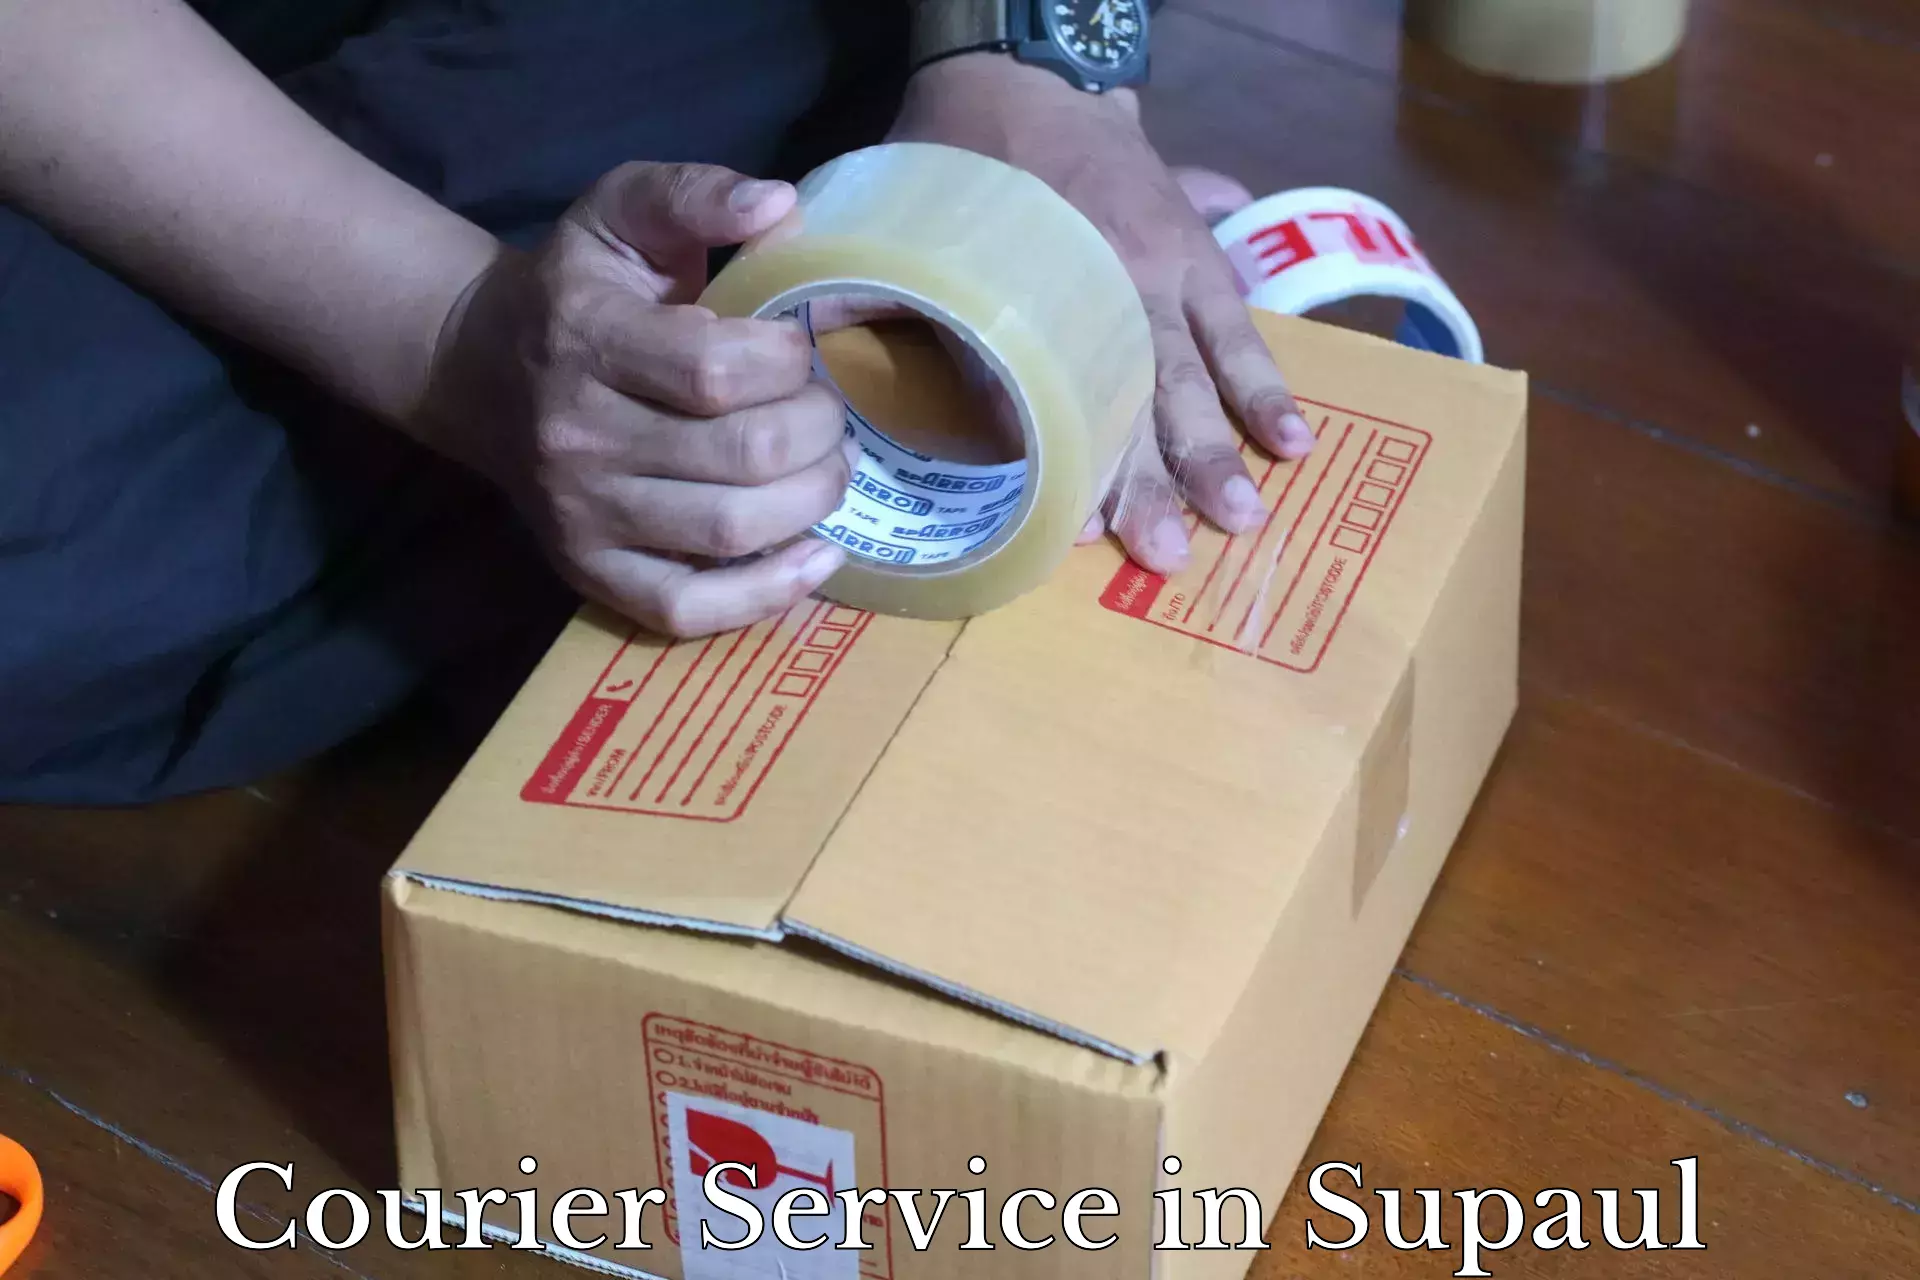 Air courier services in Supaul